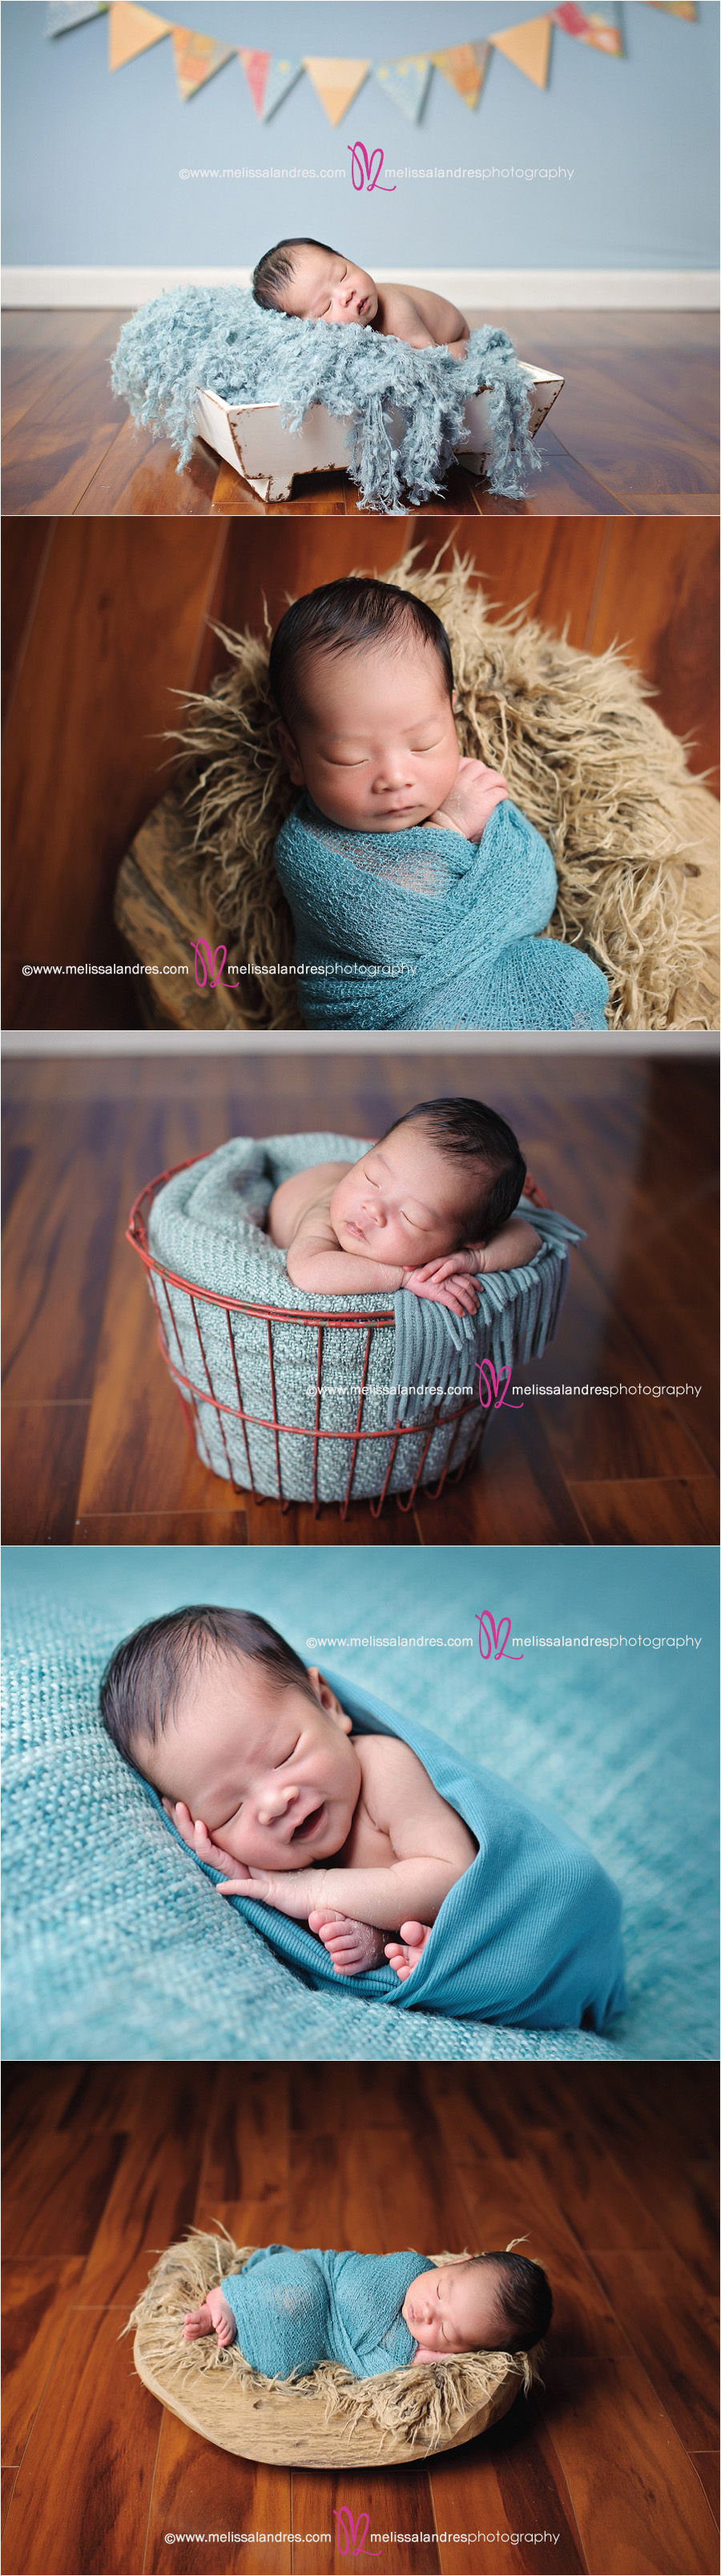 the cutest newborn babies in props by Coachella valley baby photographer Melissa Landres